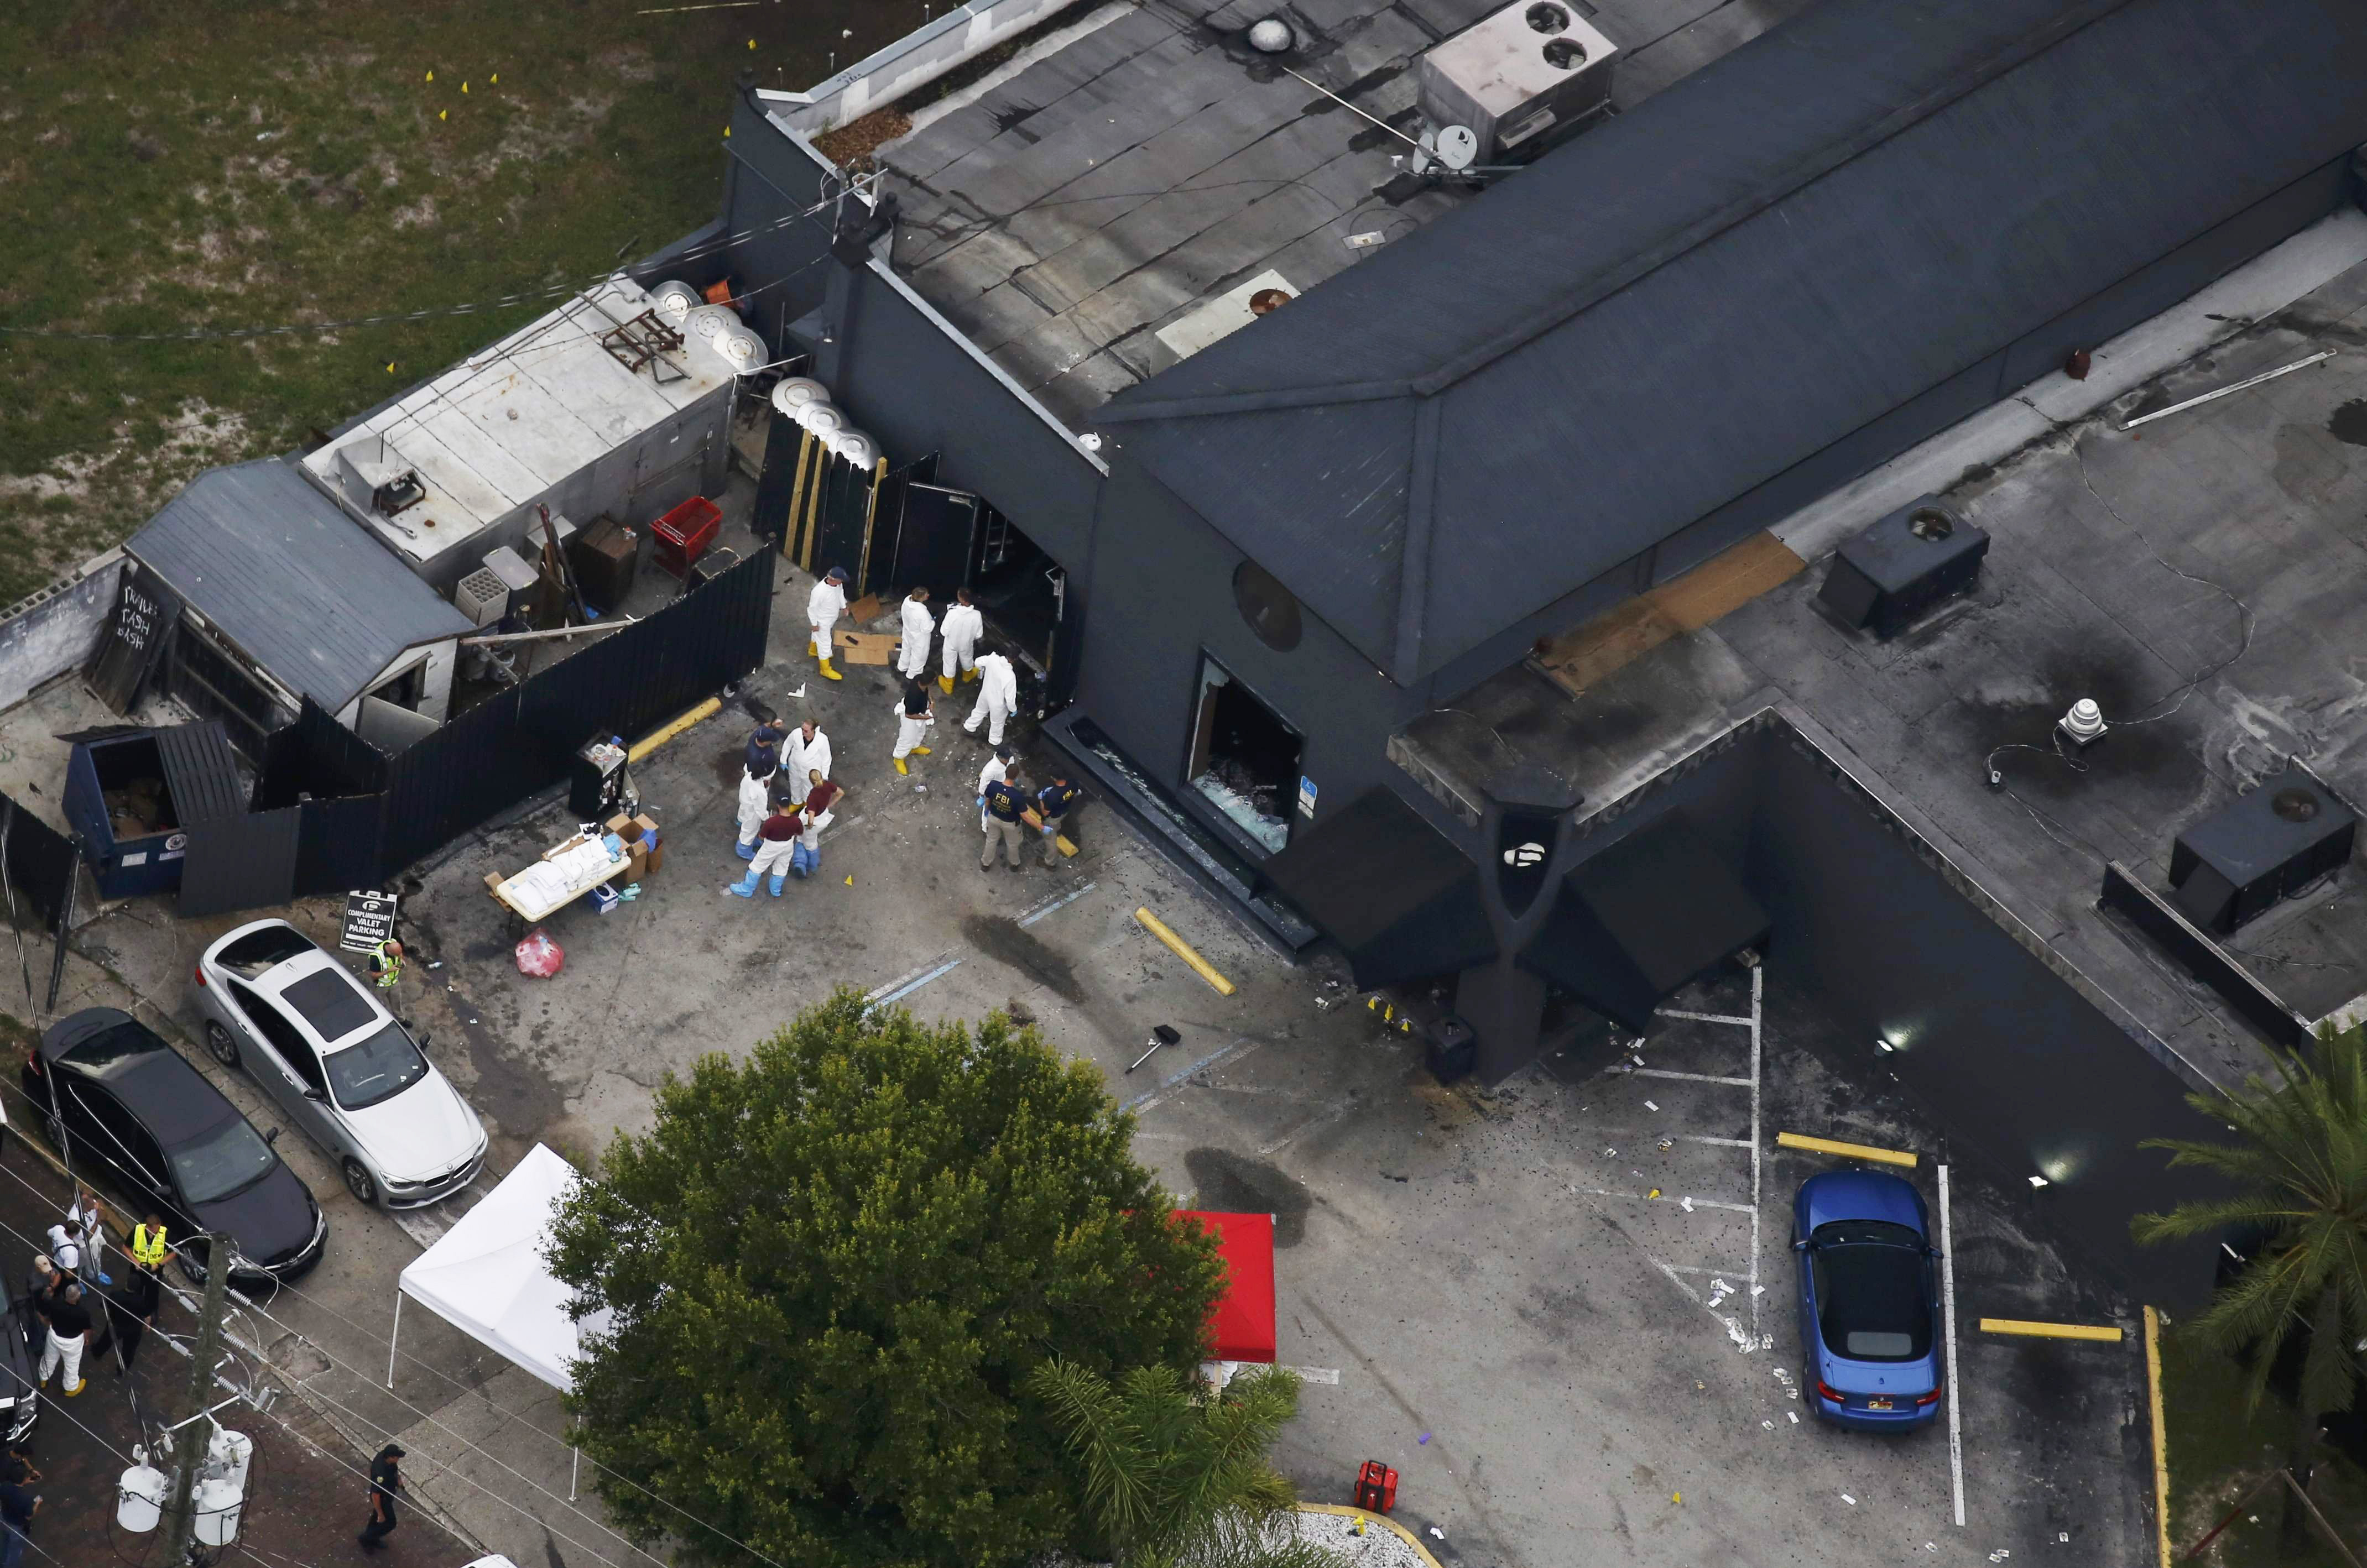 Police and forensics investigators work at the crime scene of the Pulse nightclub shooting in Orlando, Fla., on June 12, 2016.